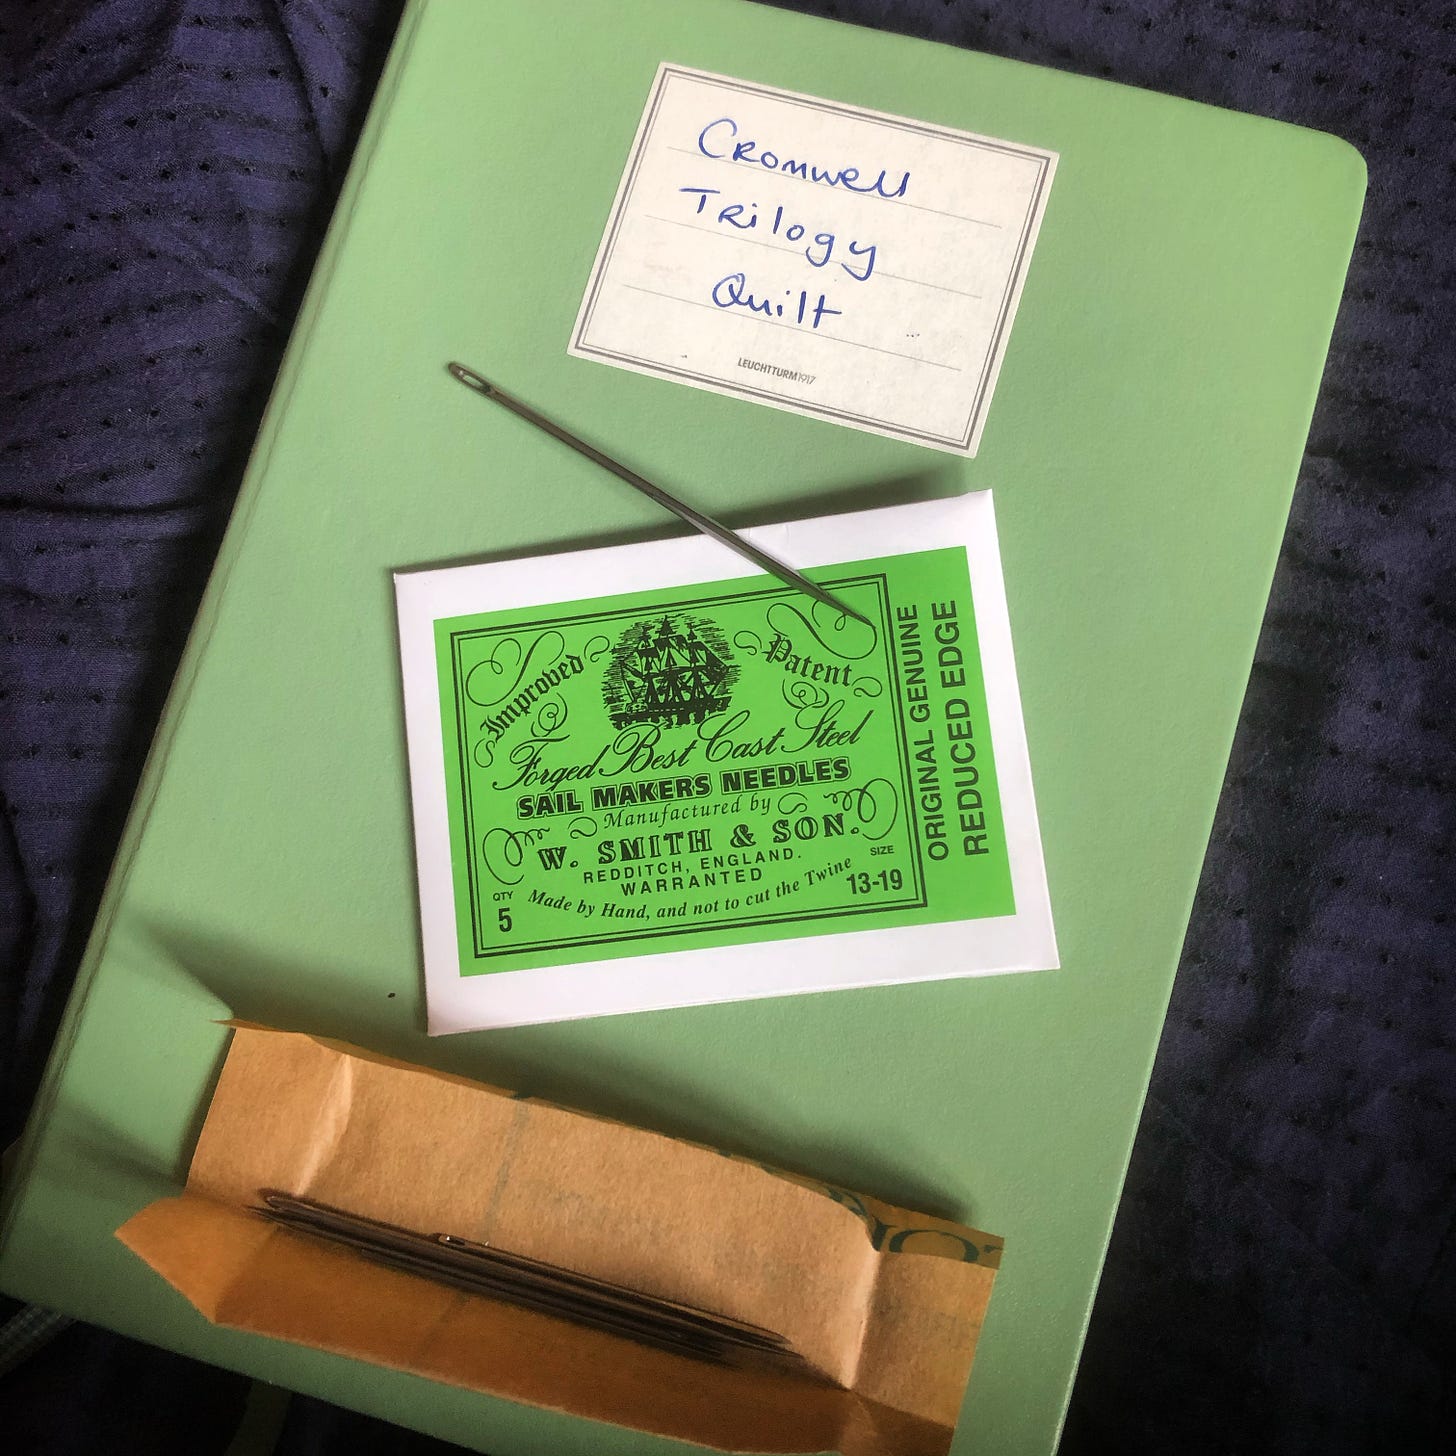 A green notebook labelled “Cromwell Trilogy Quilt”. On the top, there is a green packet marked “Sail Makers Needles”, and a large thick needle is visible.